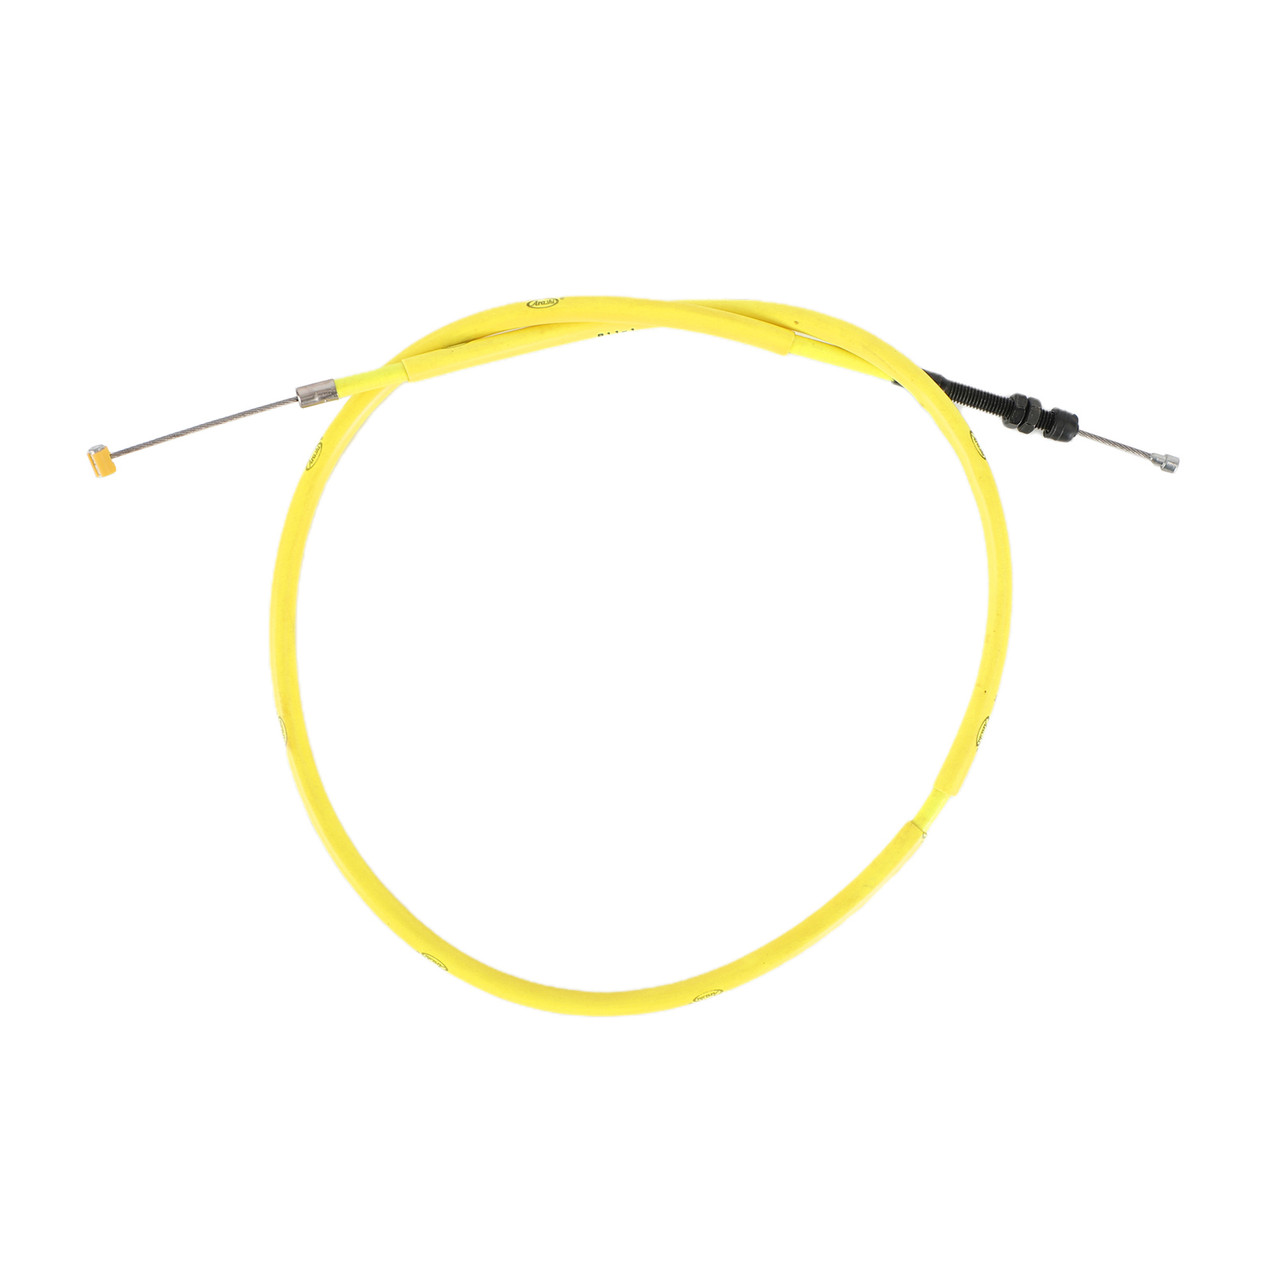 Clutch Cable Wire Fit for Yamaha YZF R1 2002-2003 Yellow